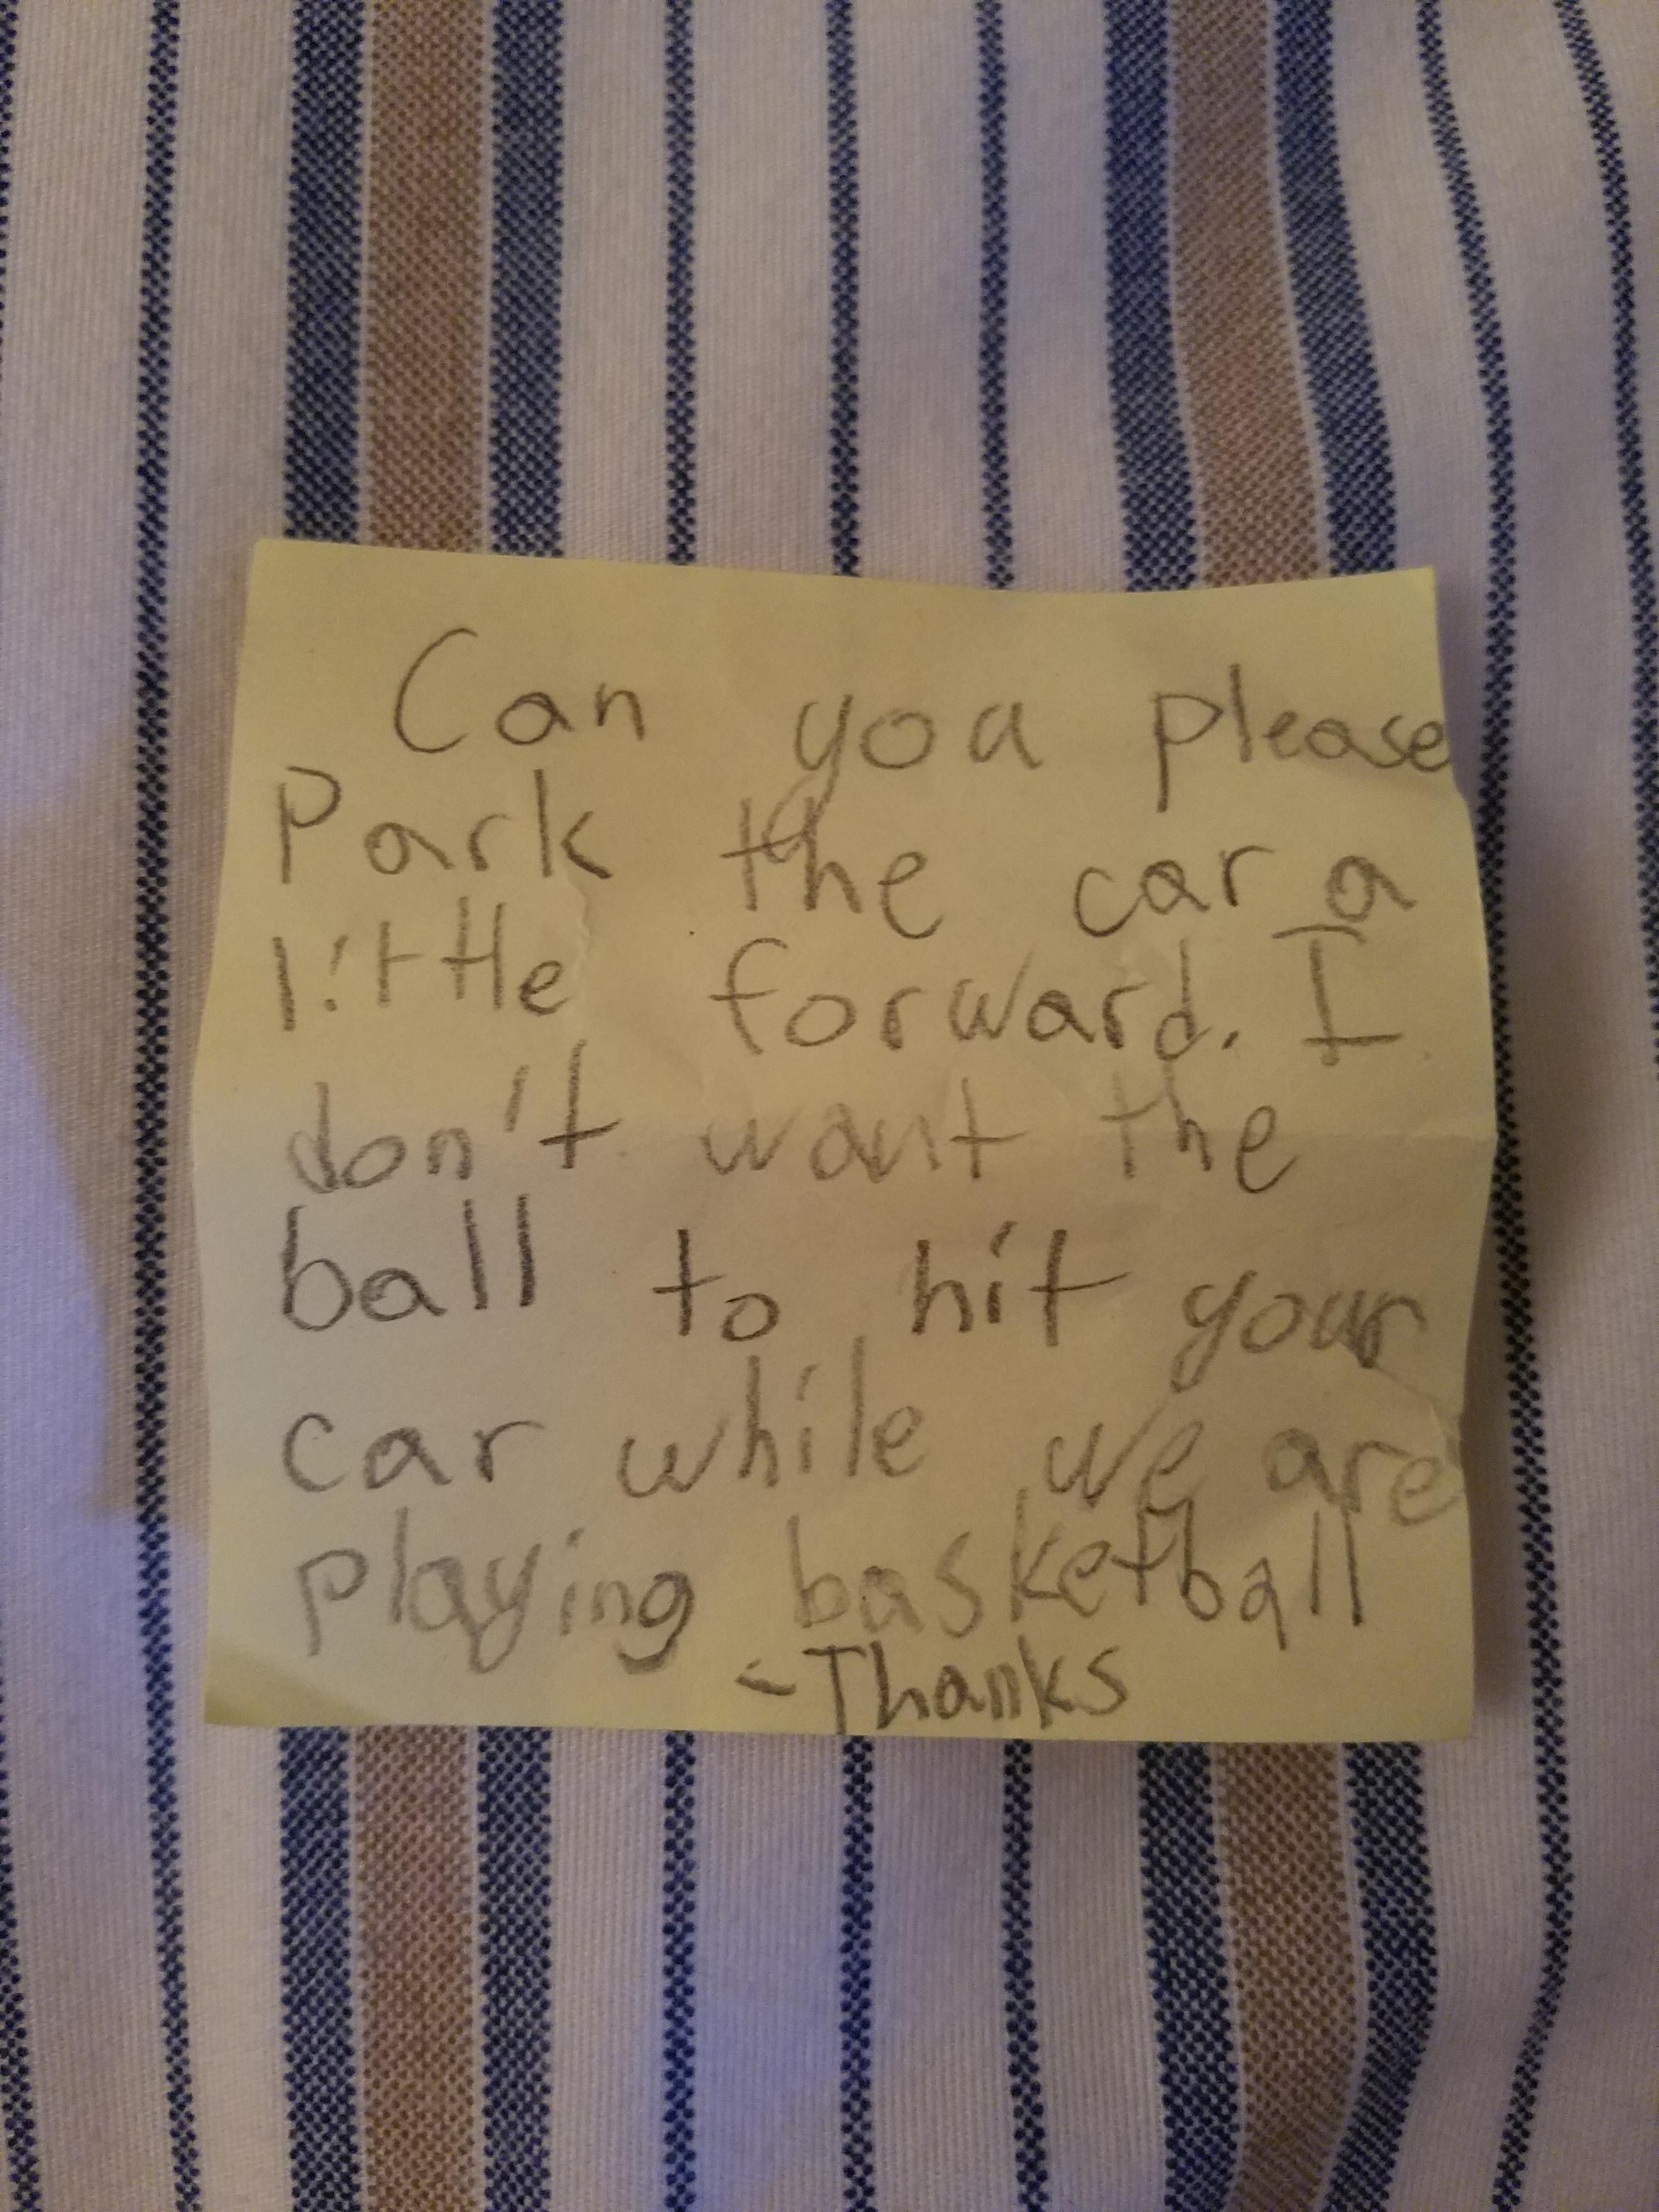 Found this post it on my car this mormomg, Glad to see my neighbors aren't raising oblivious little ***s